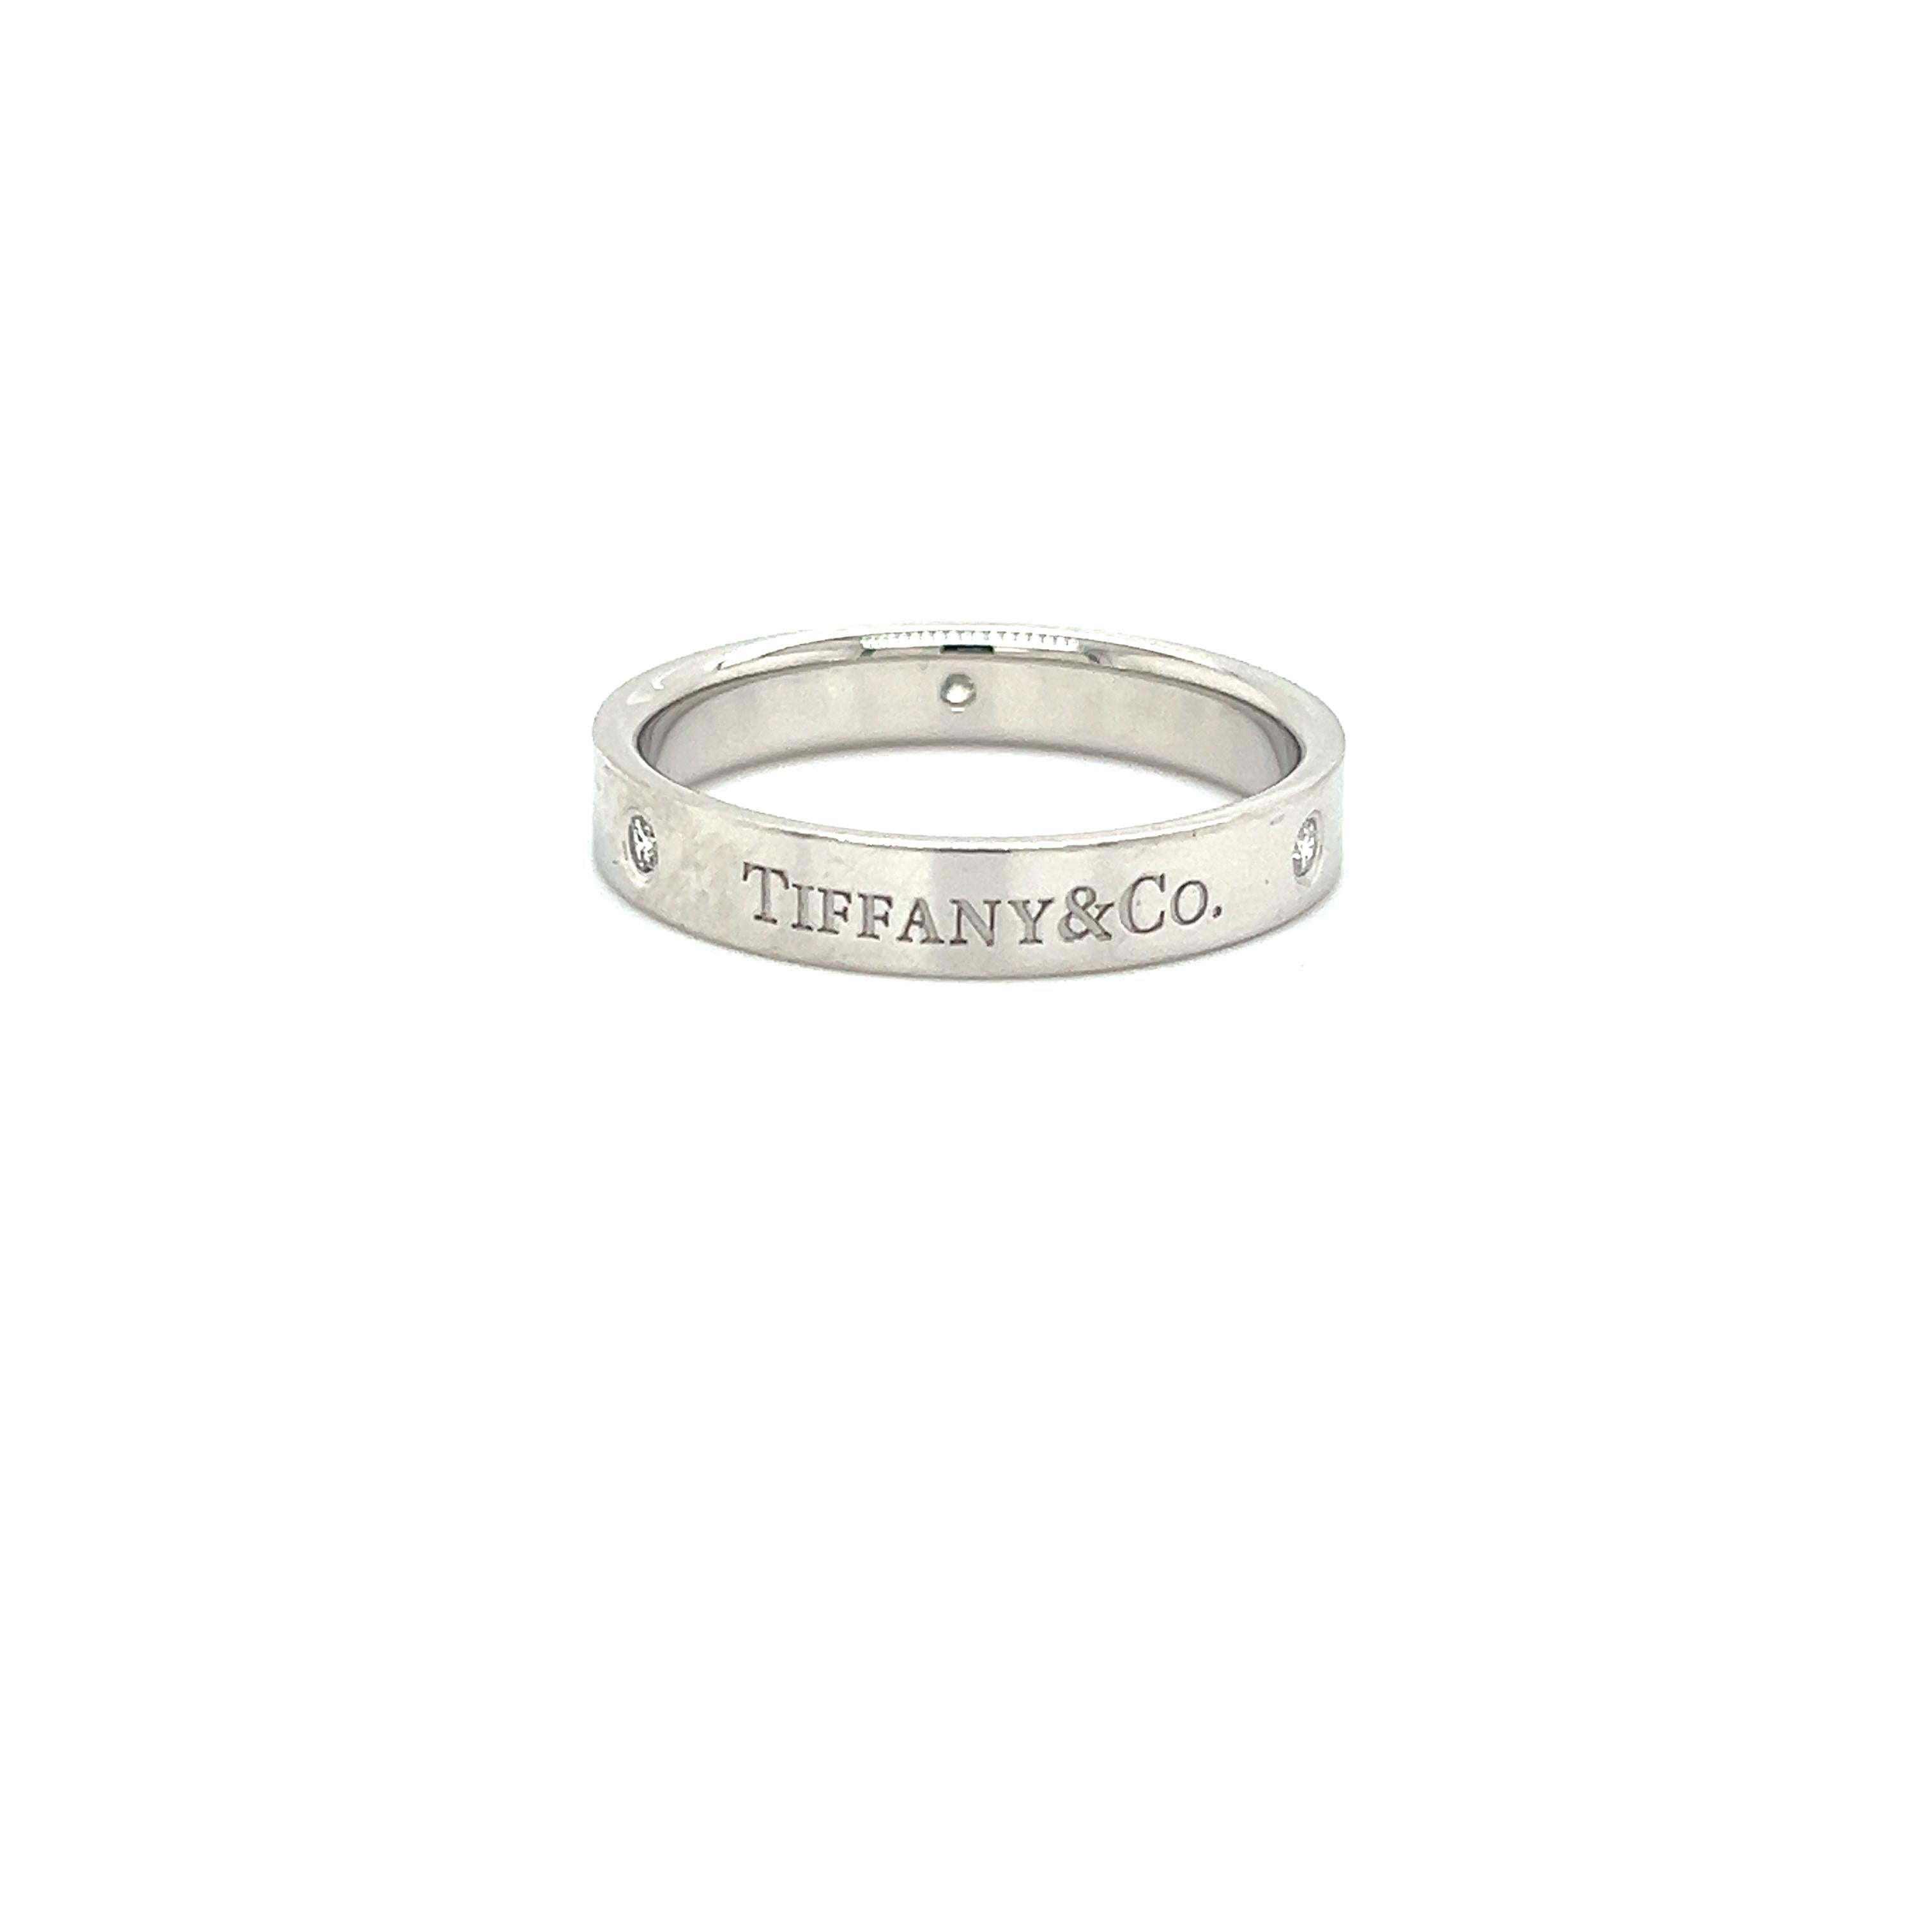 Classic design from famed designer Tiffany & Co. This ring is crafted in platinum and shows a 4 mm width. Three round brilliant cut diamonds are set into the design alternating with the brands logo 